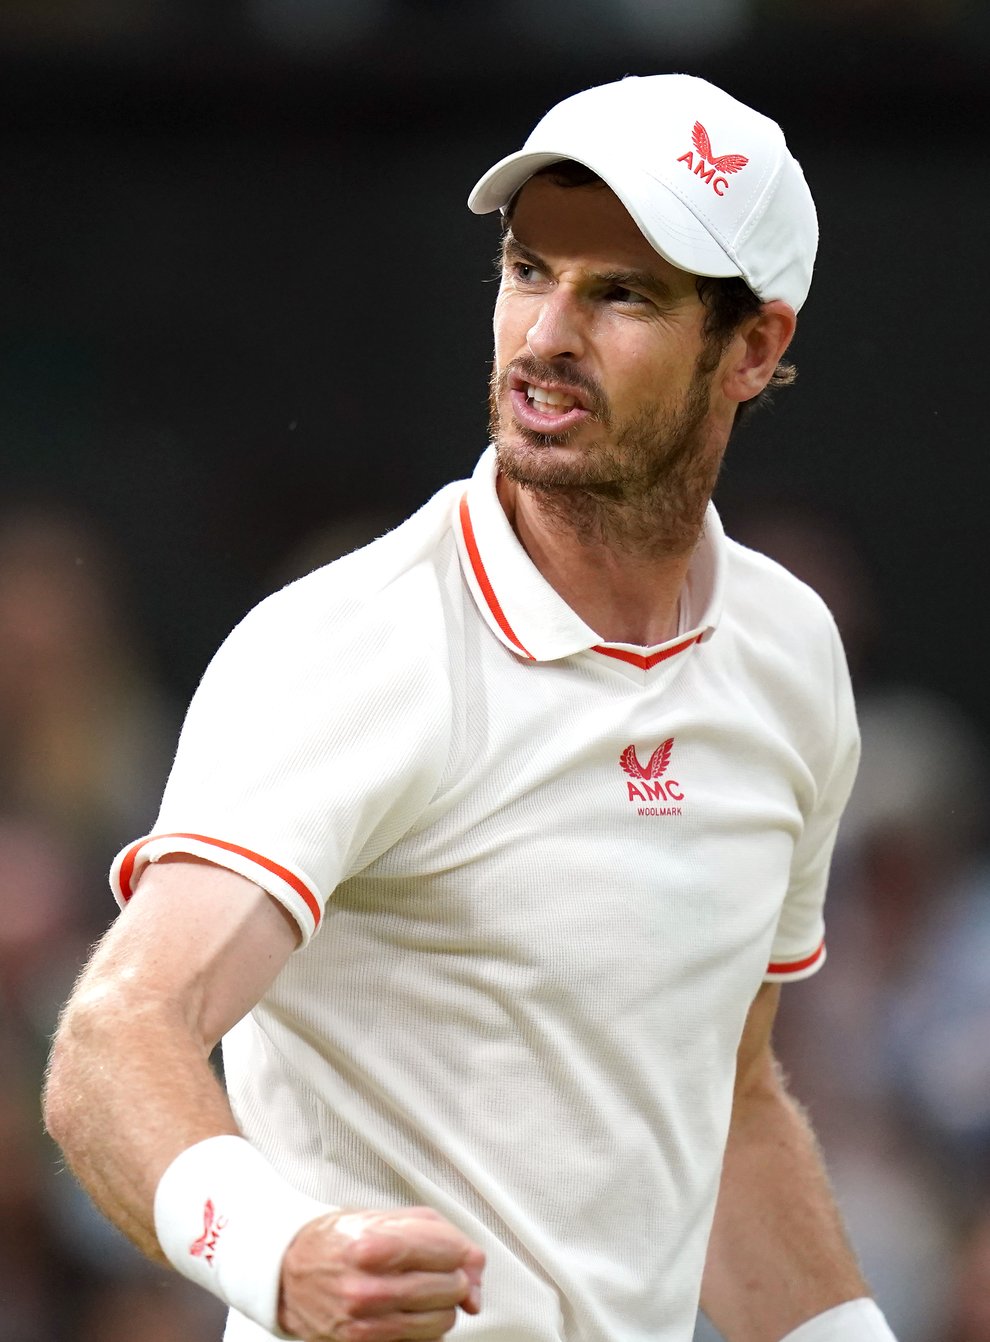 Andy Murray (pictured) will face Roberto Bautista Agut in the Qatar Open second round (Adam Davy/PA)